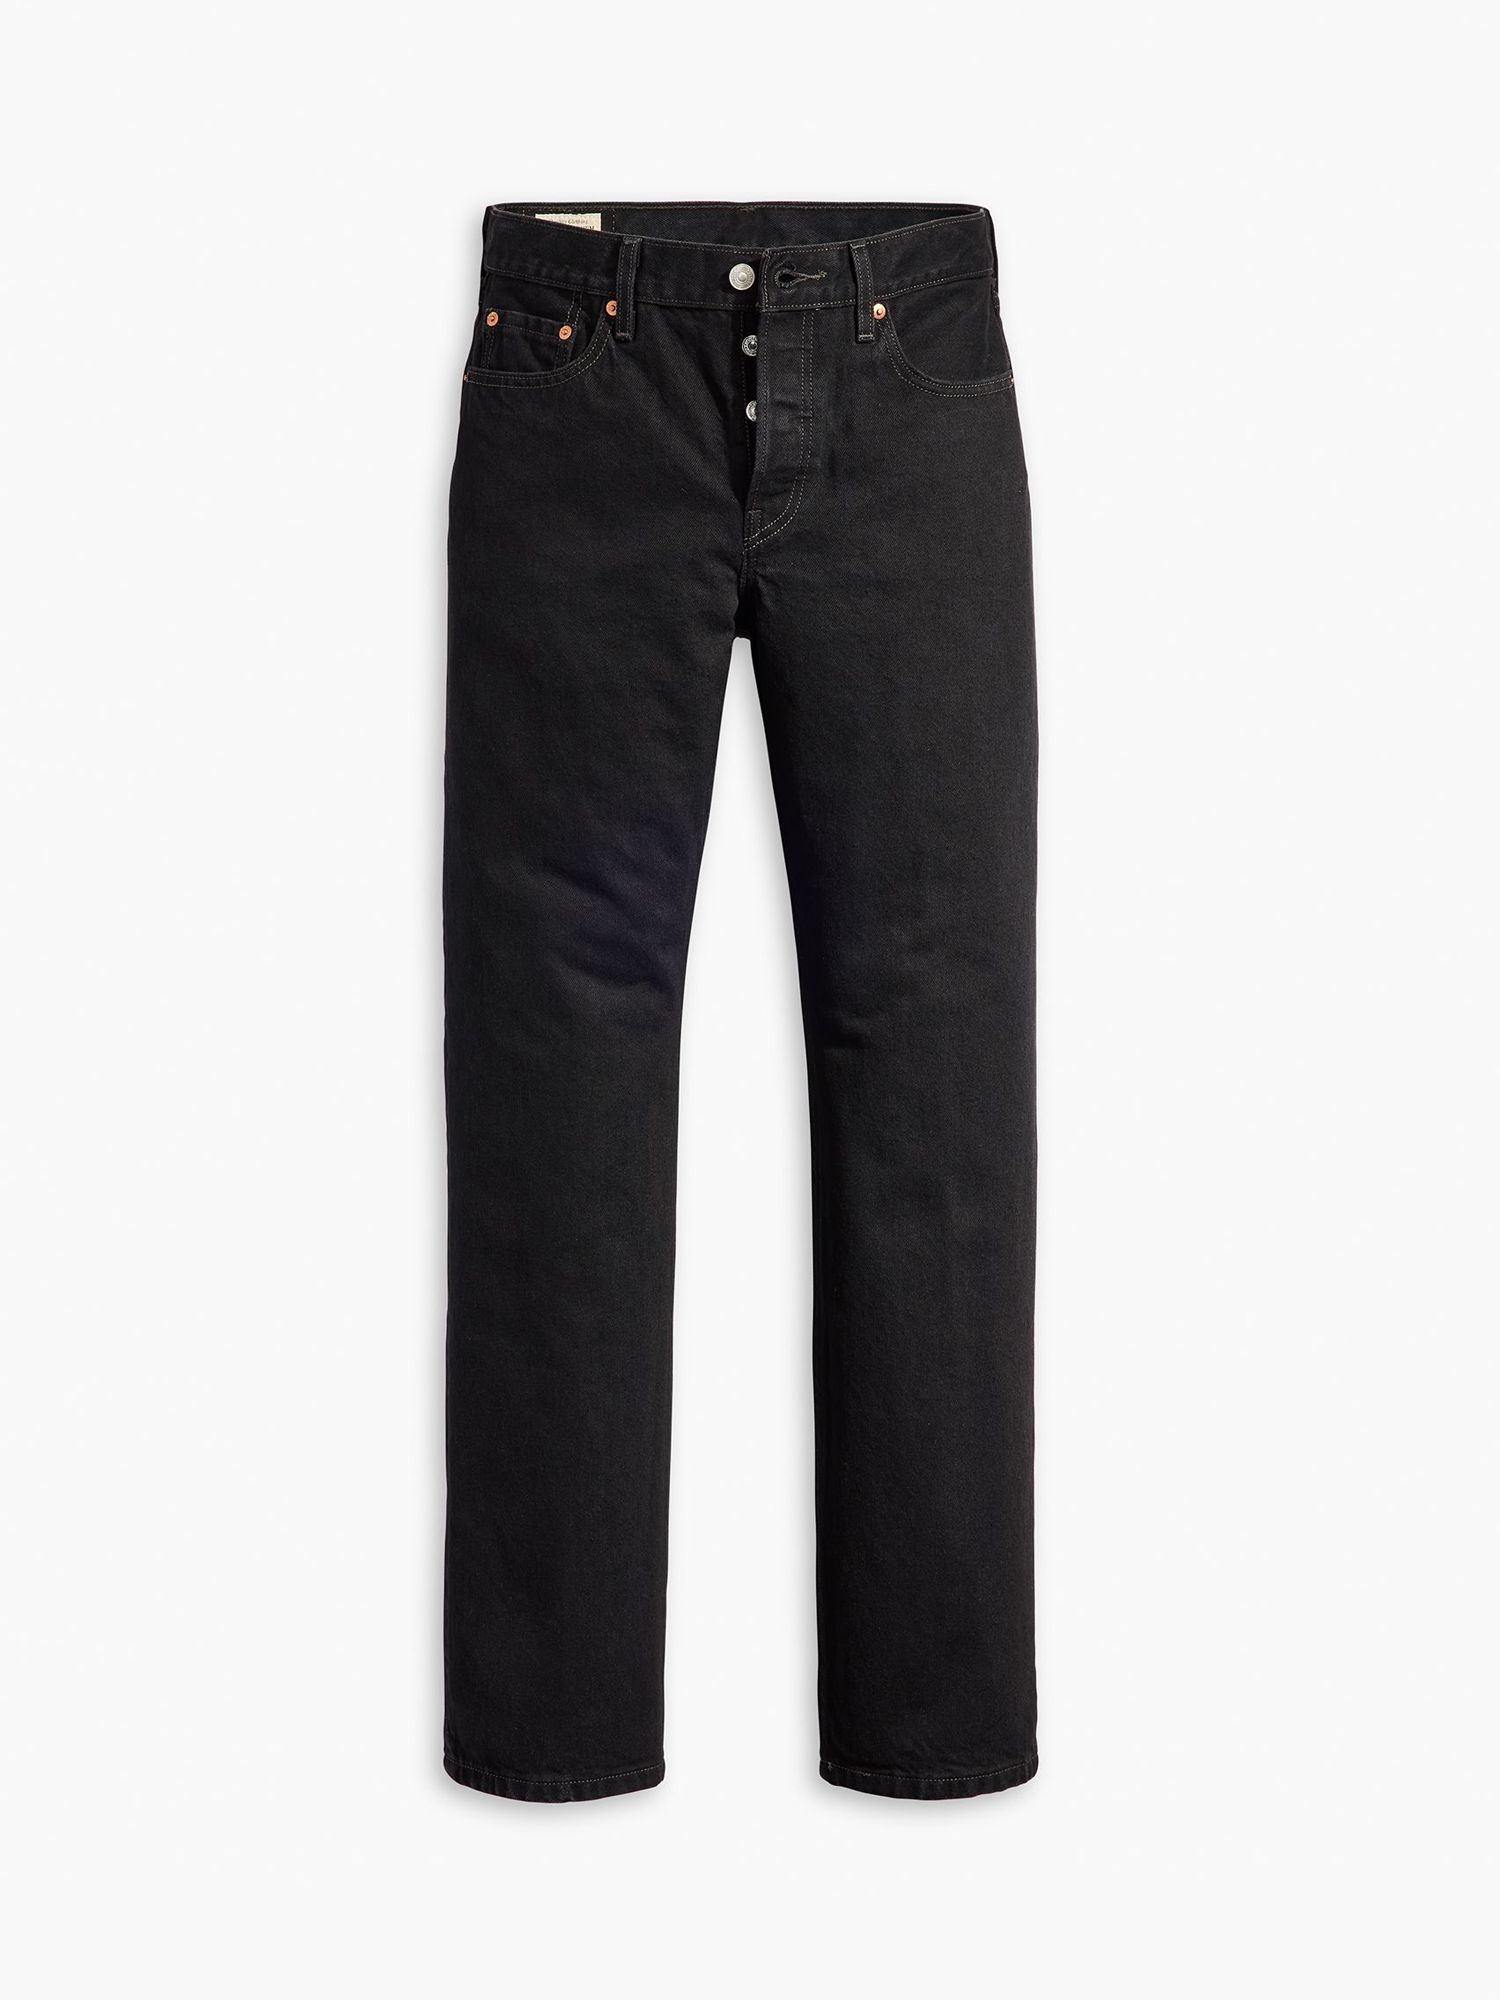 Levi's 501 90's Jeans, Rinsed Blacktop at John Lewis & Partners